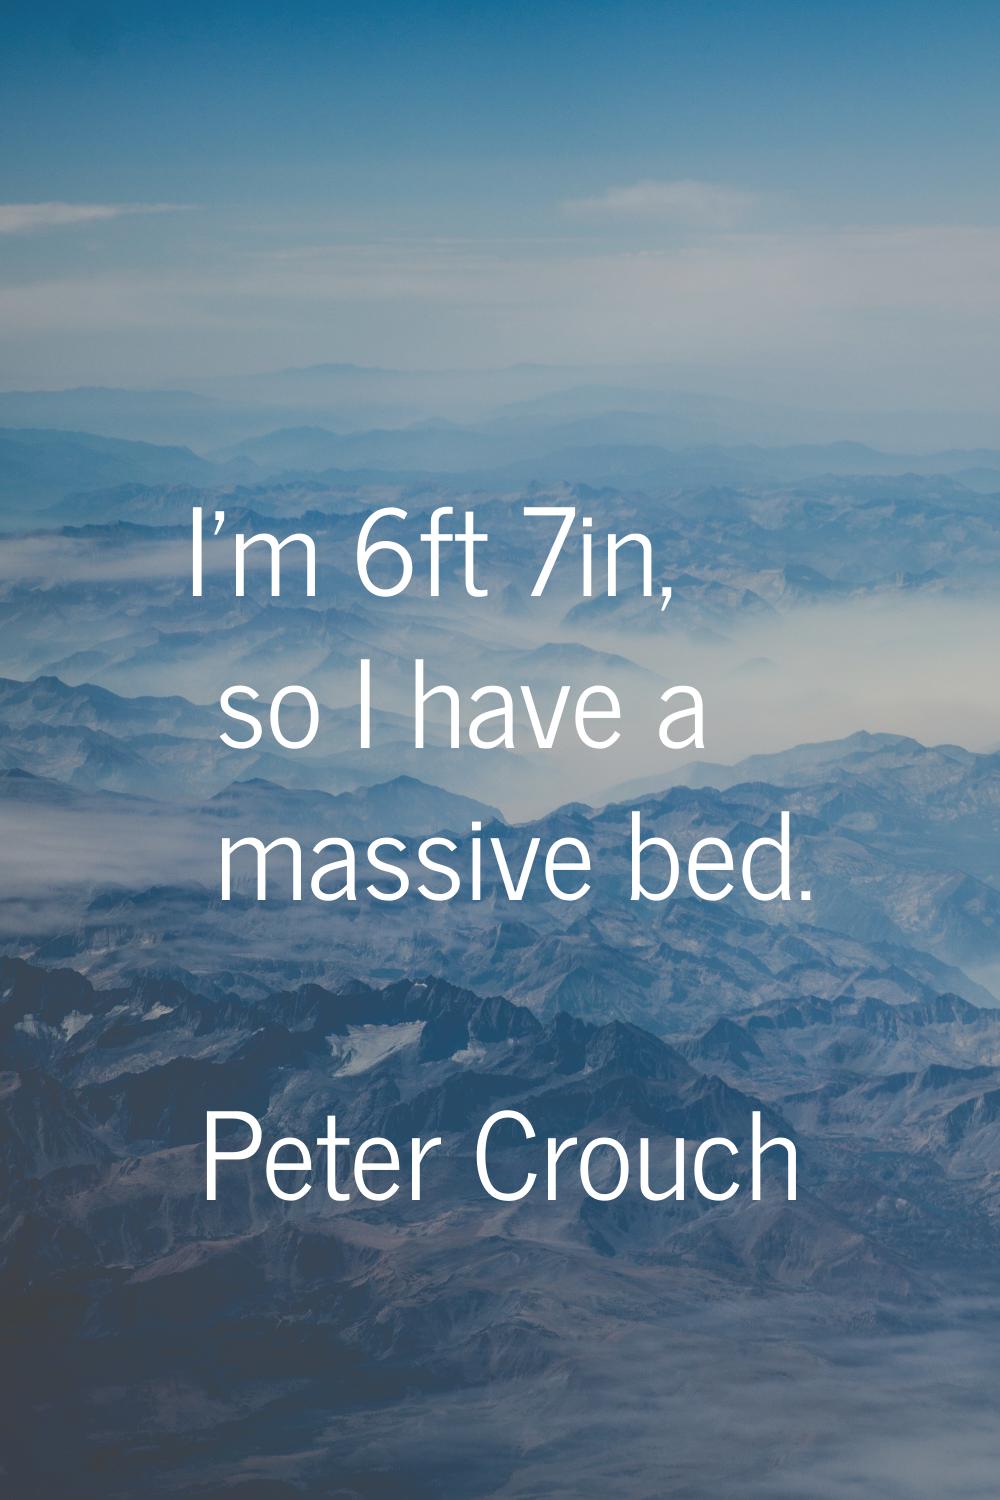 I'm 6ft 7in, so I have a massive bed.